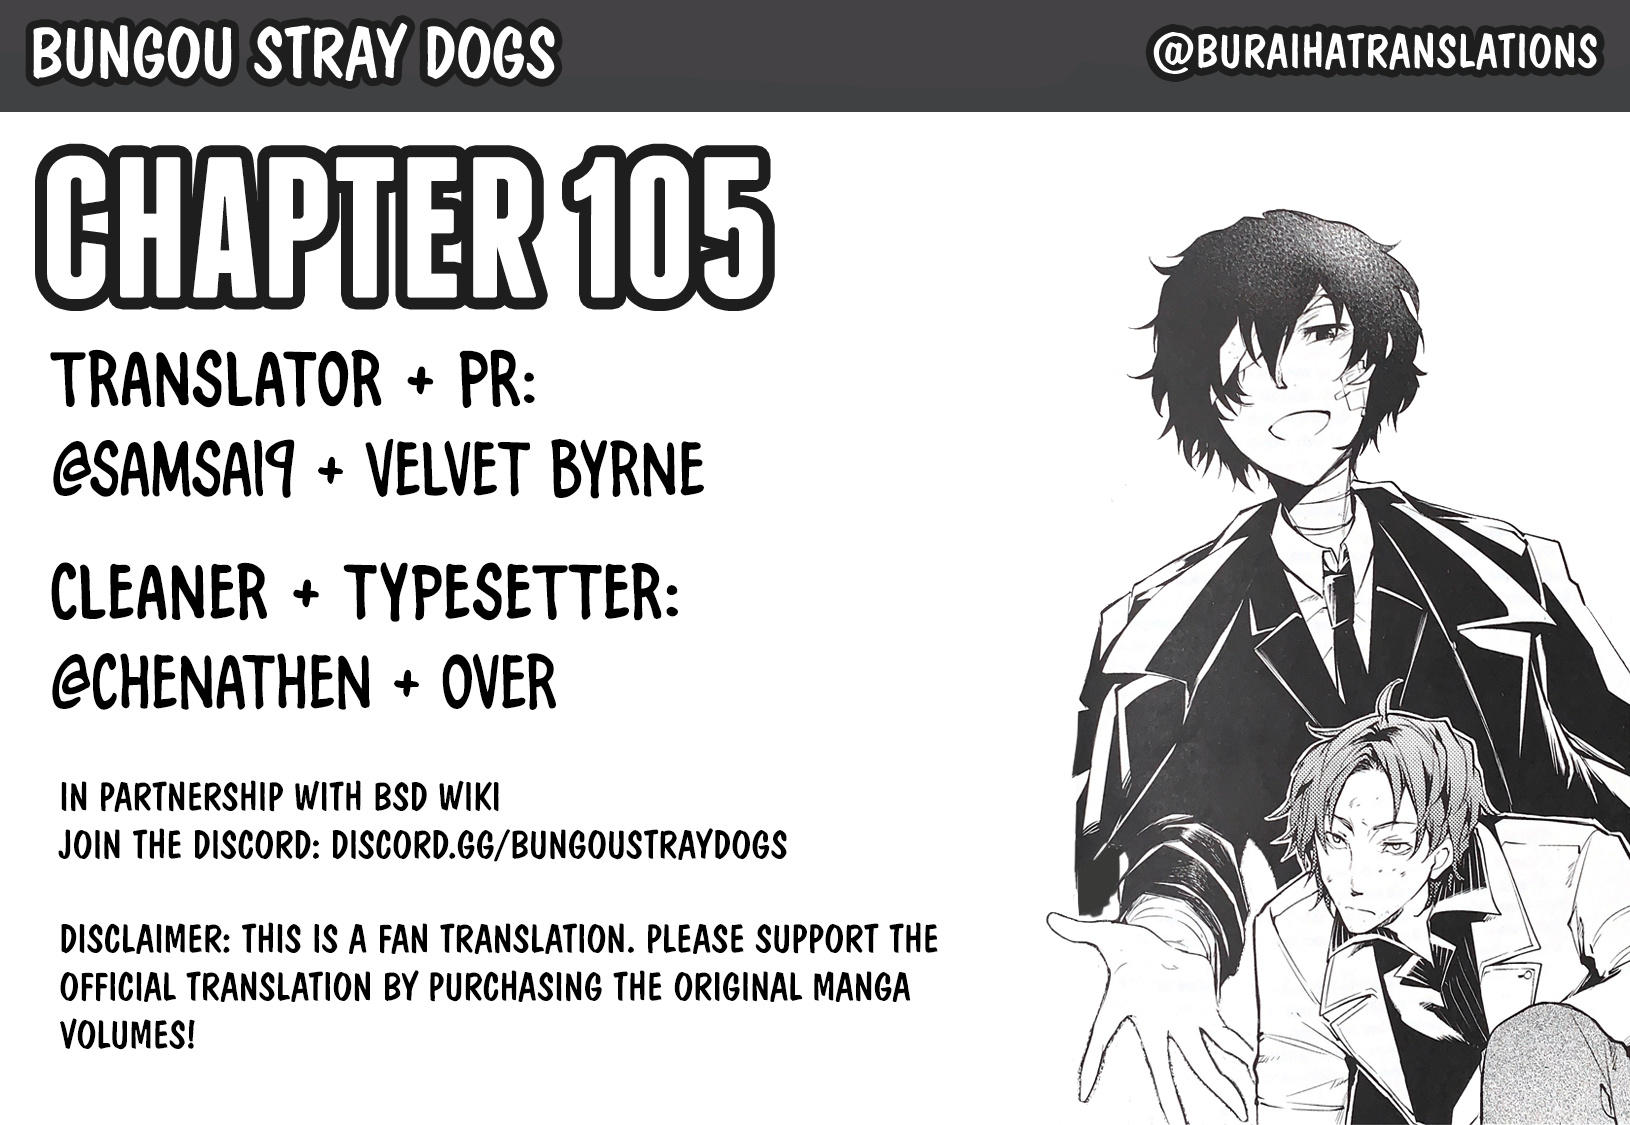 Bungou Stray Dogs 31: Fixed - Read Bungou Stray Dogs Chapter 31: Fixed  Online - Page 1